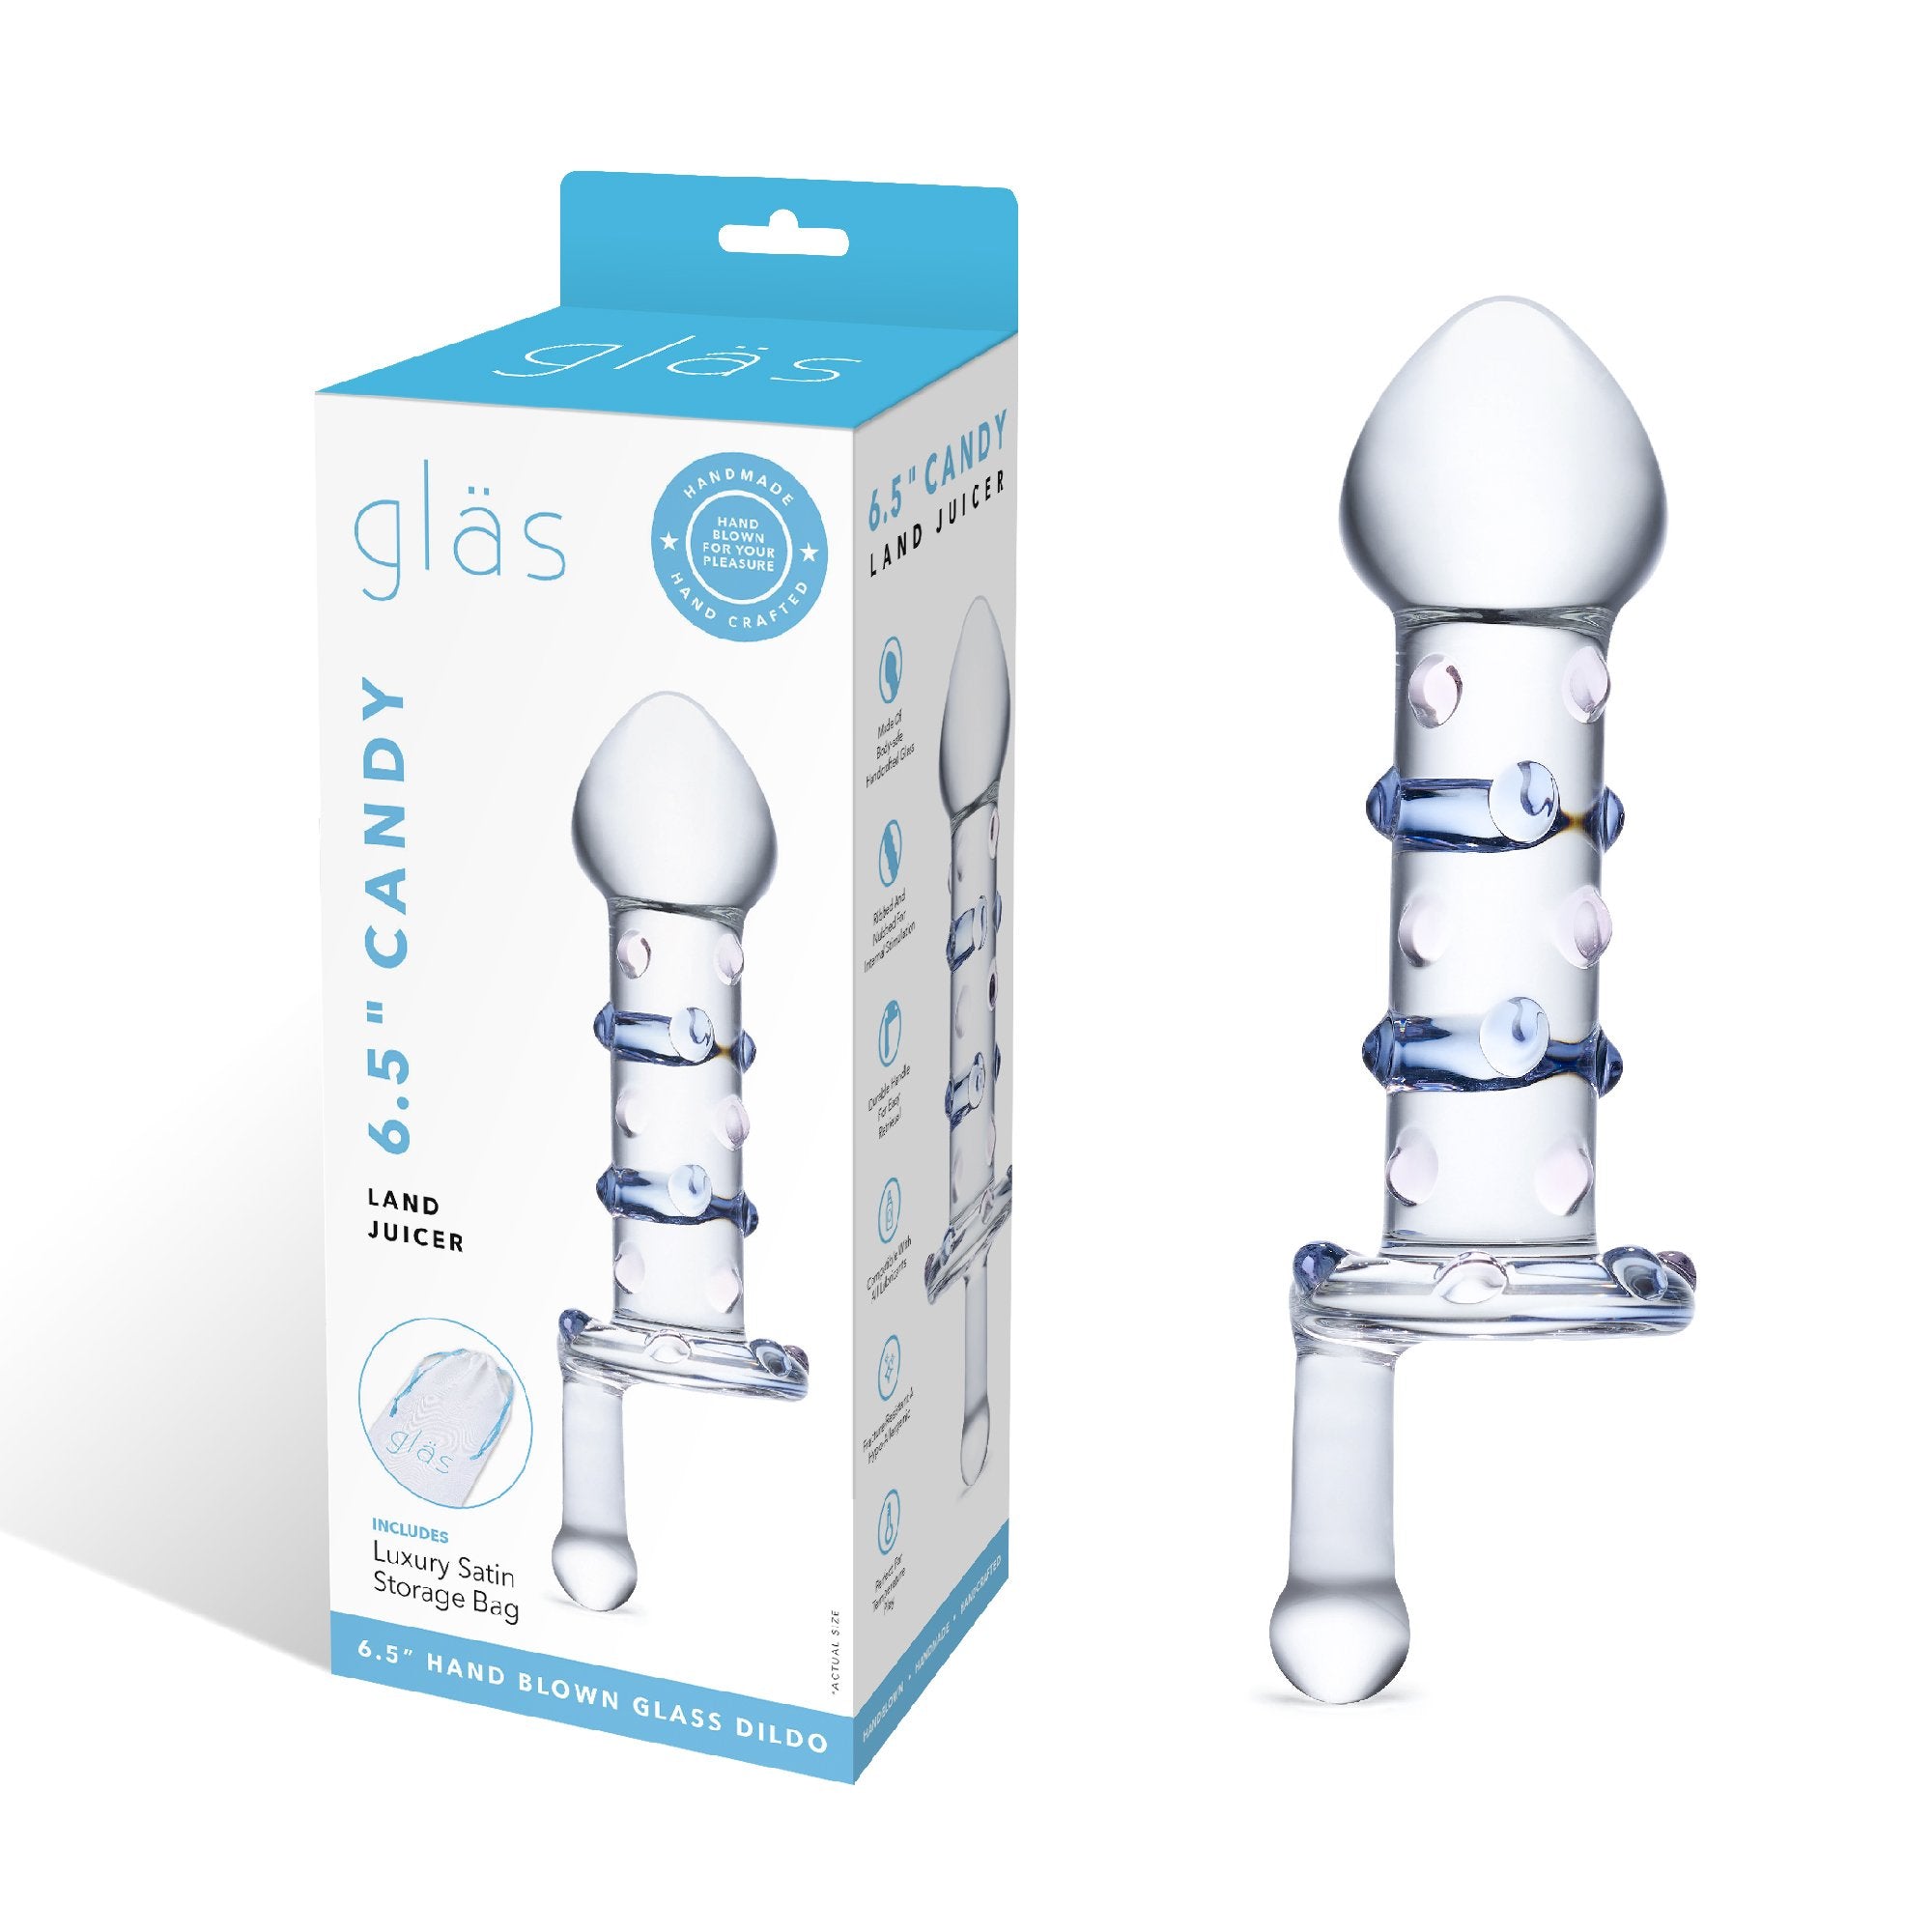 Packaging of the Gläs Candy Land Juicer Glass Anal Toy